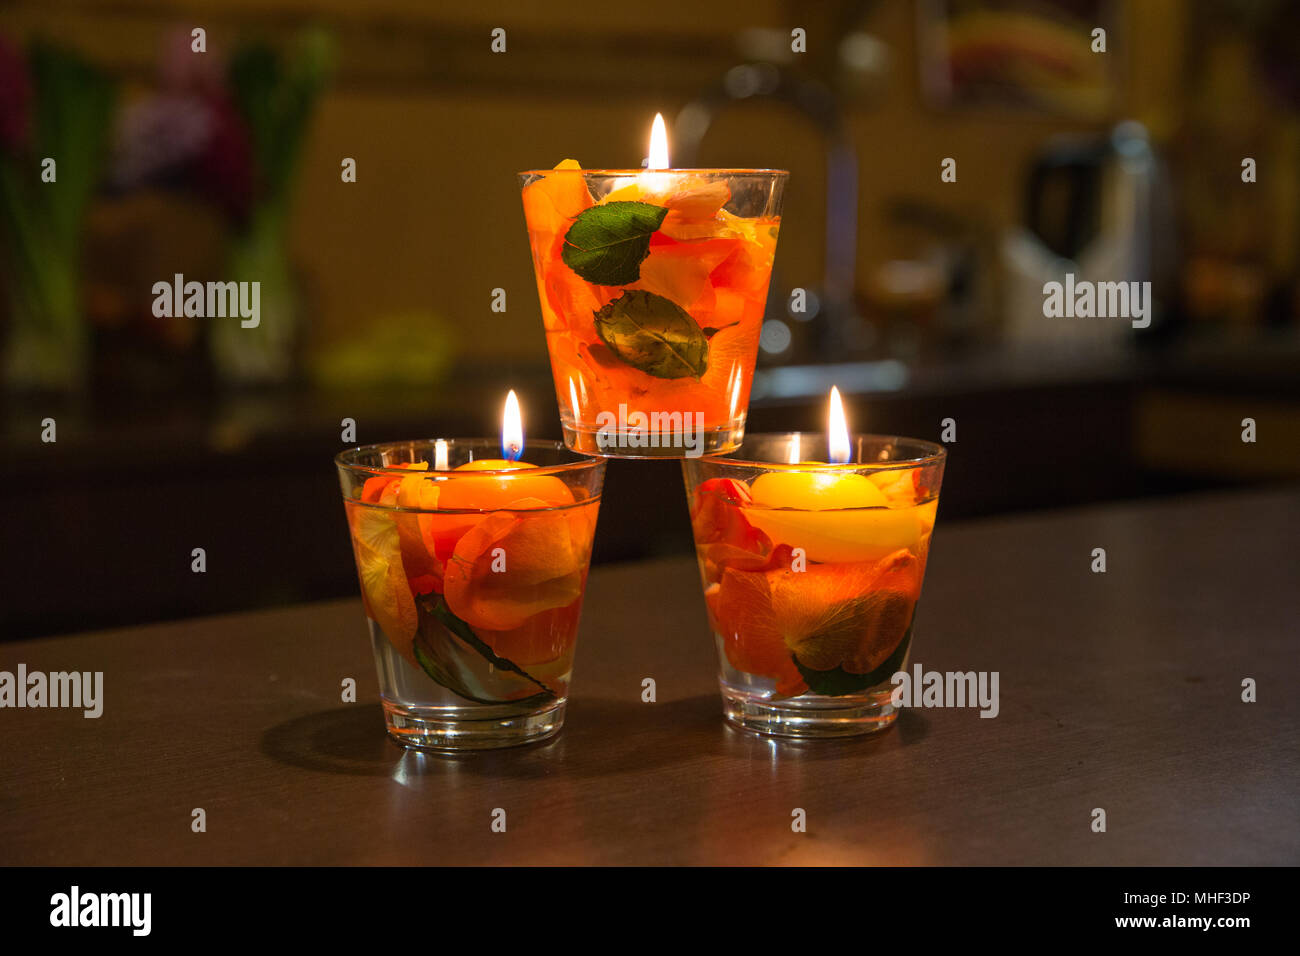 City Jekabpils, Latvia. Candles light and rose leafs inside in glass bowl. Travel photo 2018. Stock Photo